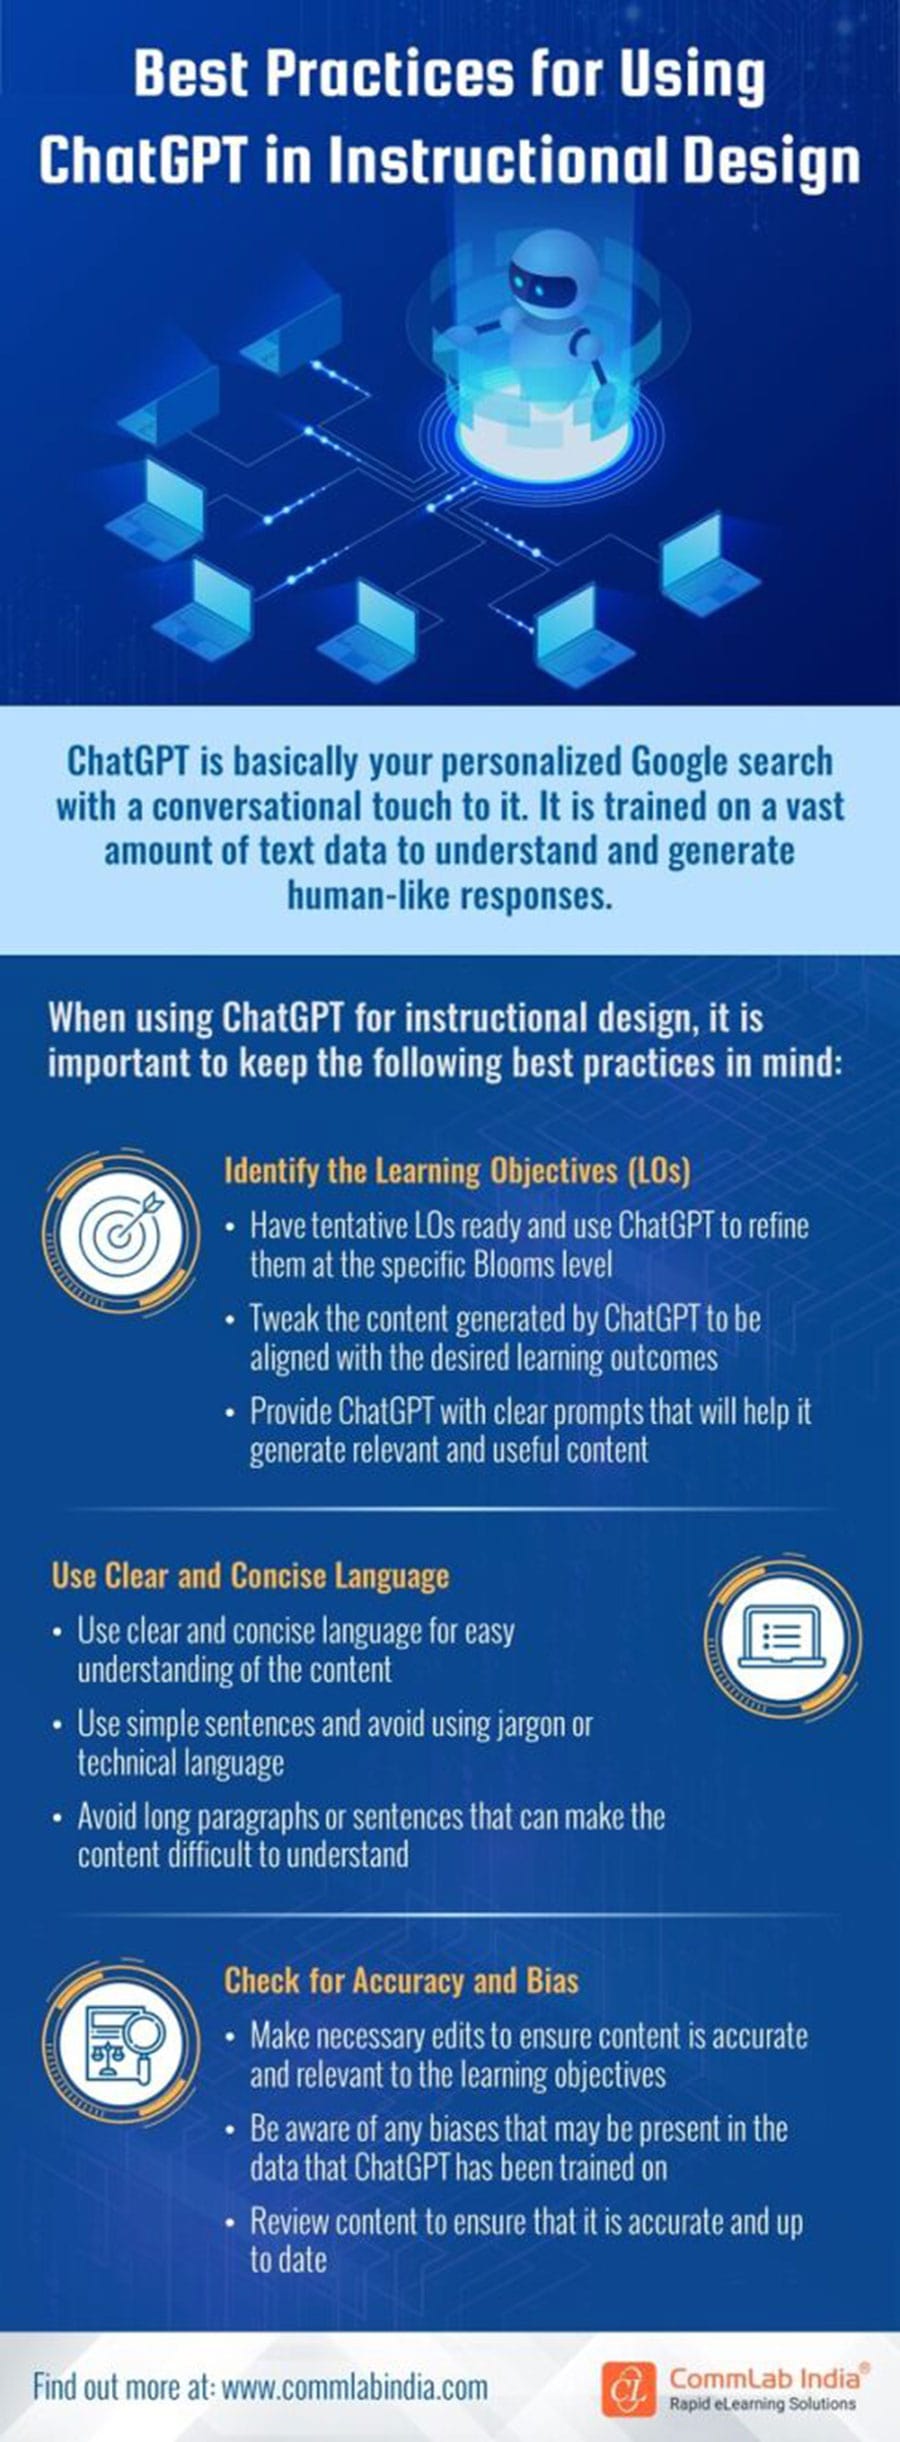 Best Practices for Using ChatGPT in ID